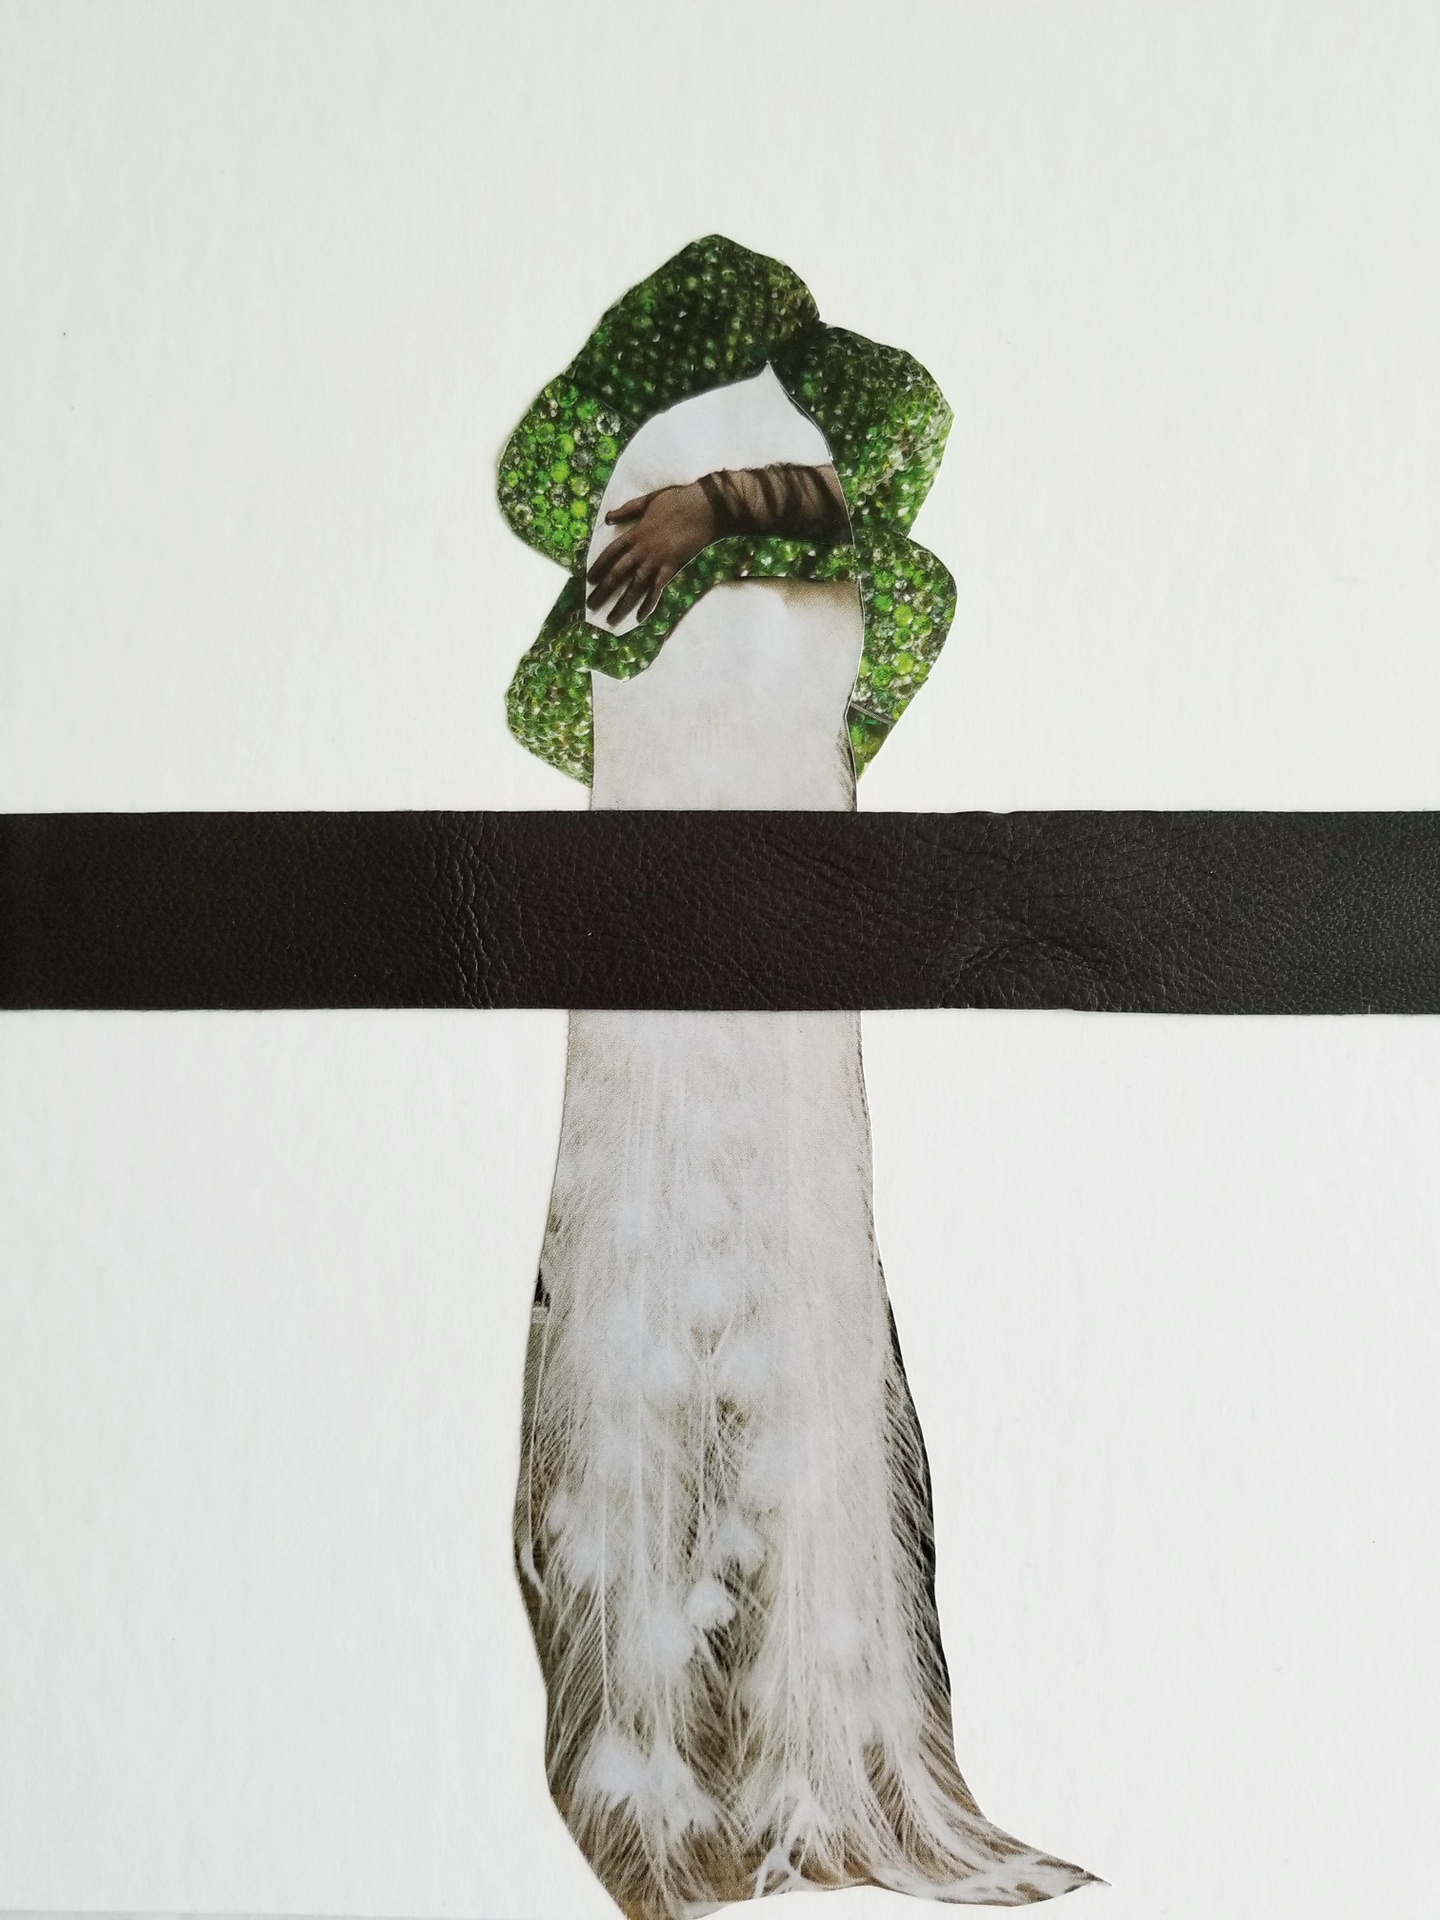 A collage of a winding, green texture; a hand wrapped around whose arm is dark hair; and long, white (possibly peacock) feathers. Dividing the composition lengthways is a black leather strap.